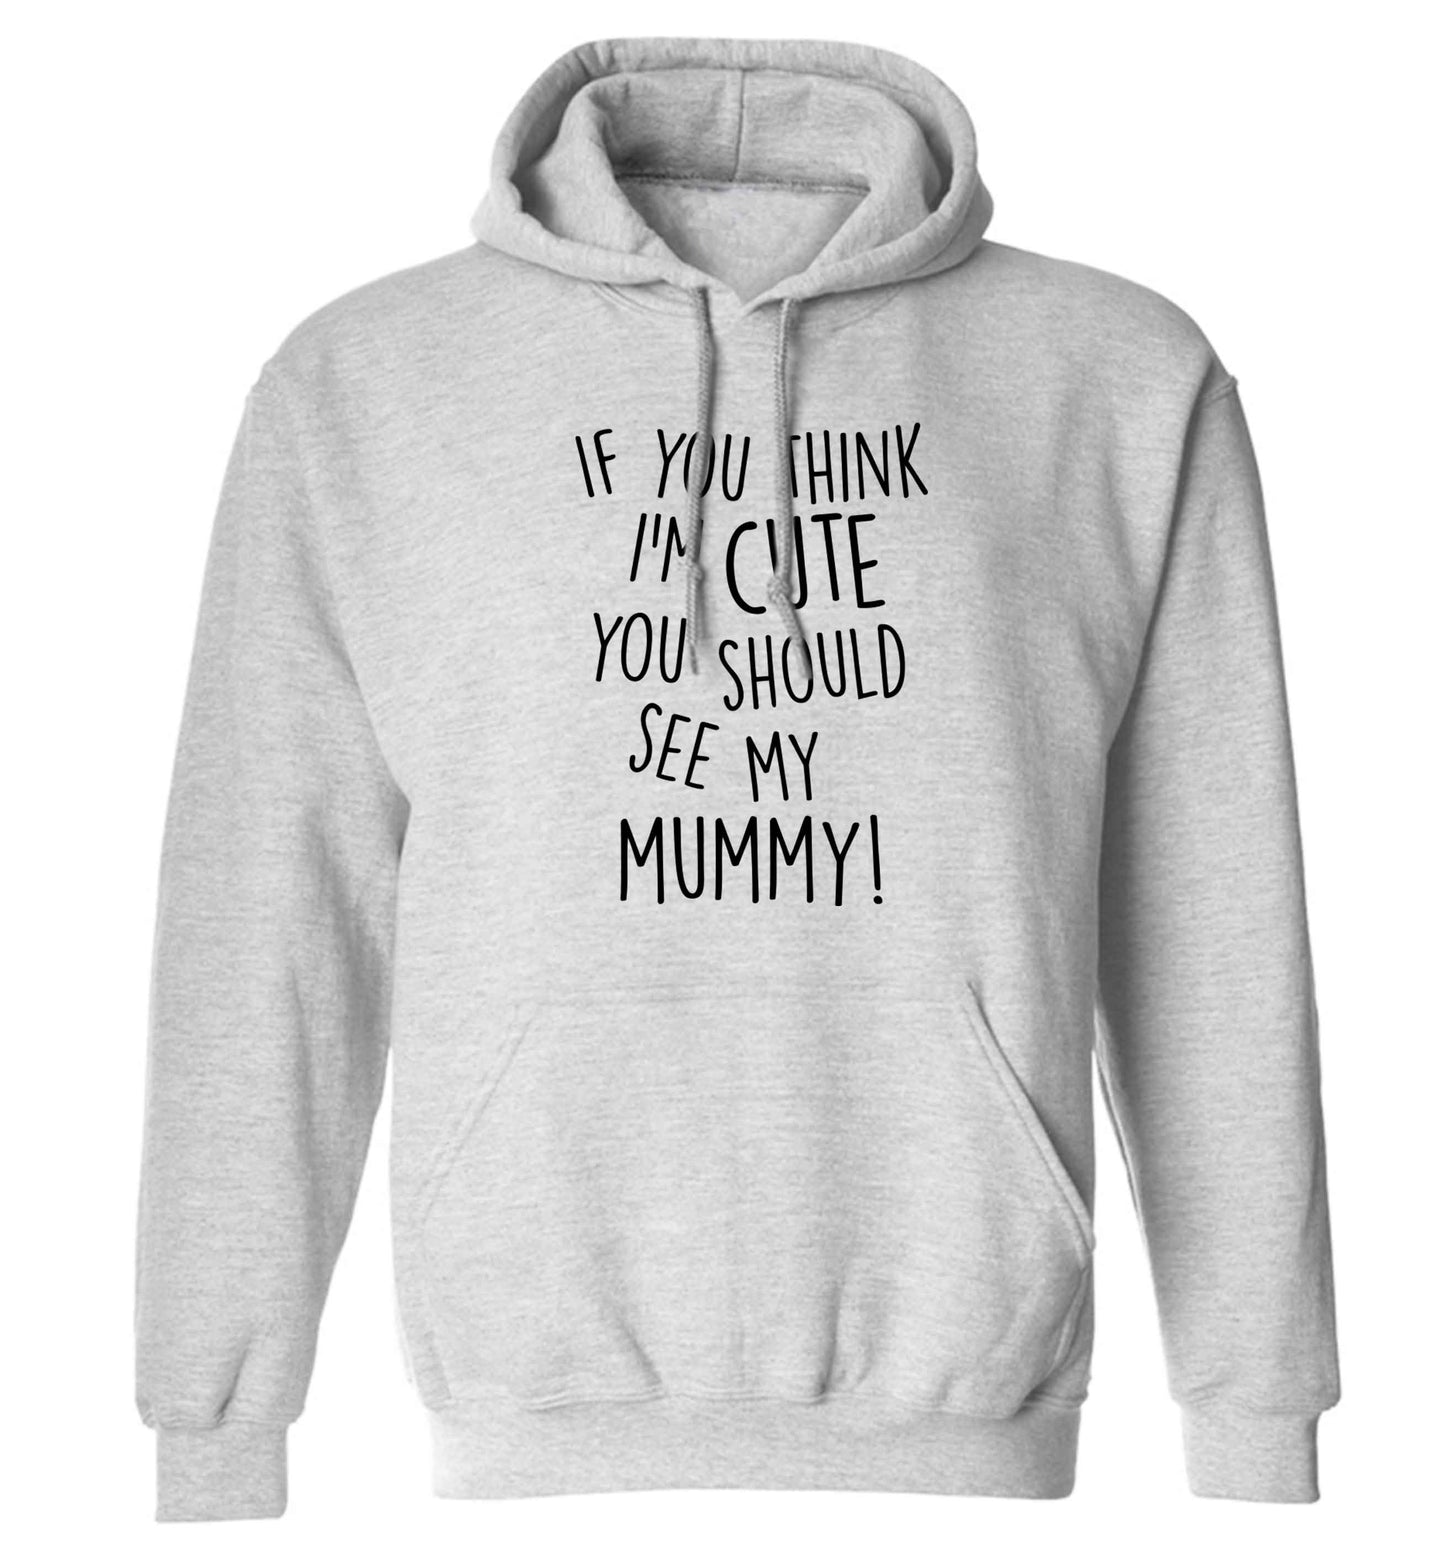 If you think I'm cute you should see my mummy adults unisex grey hoodie 2XL